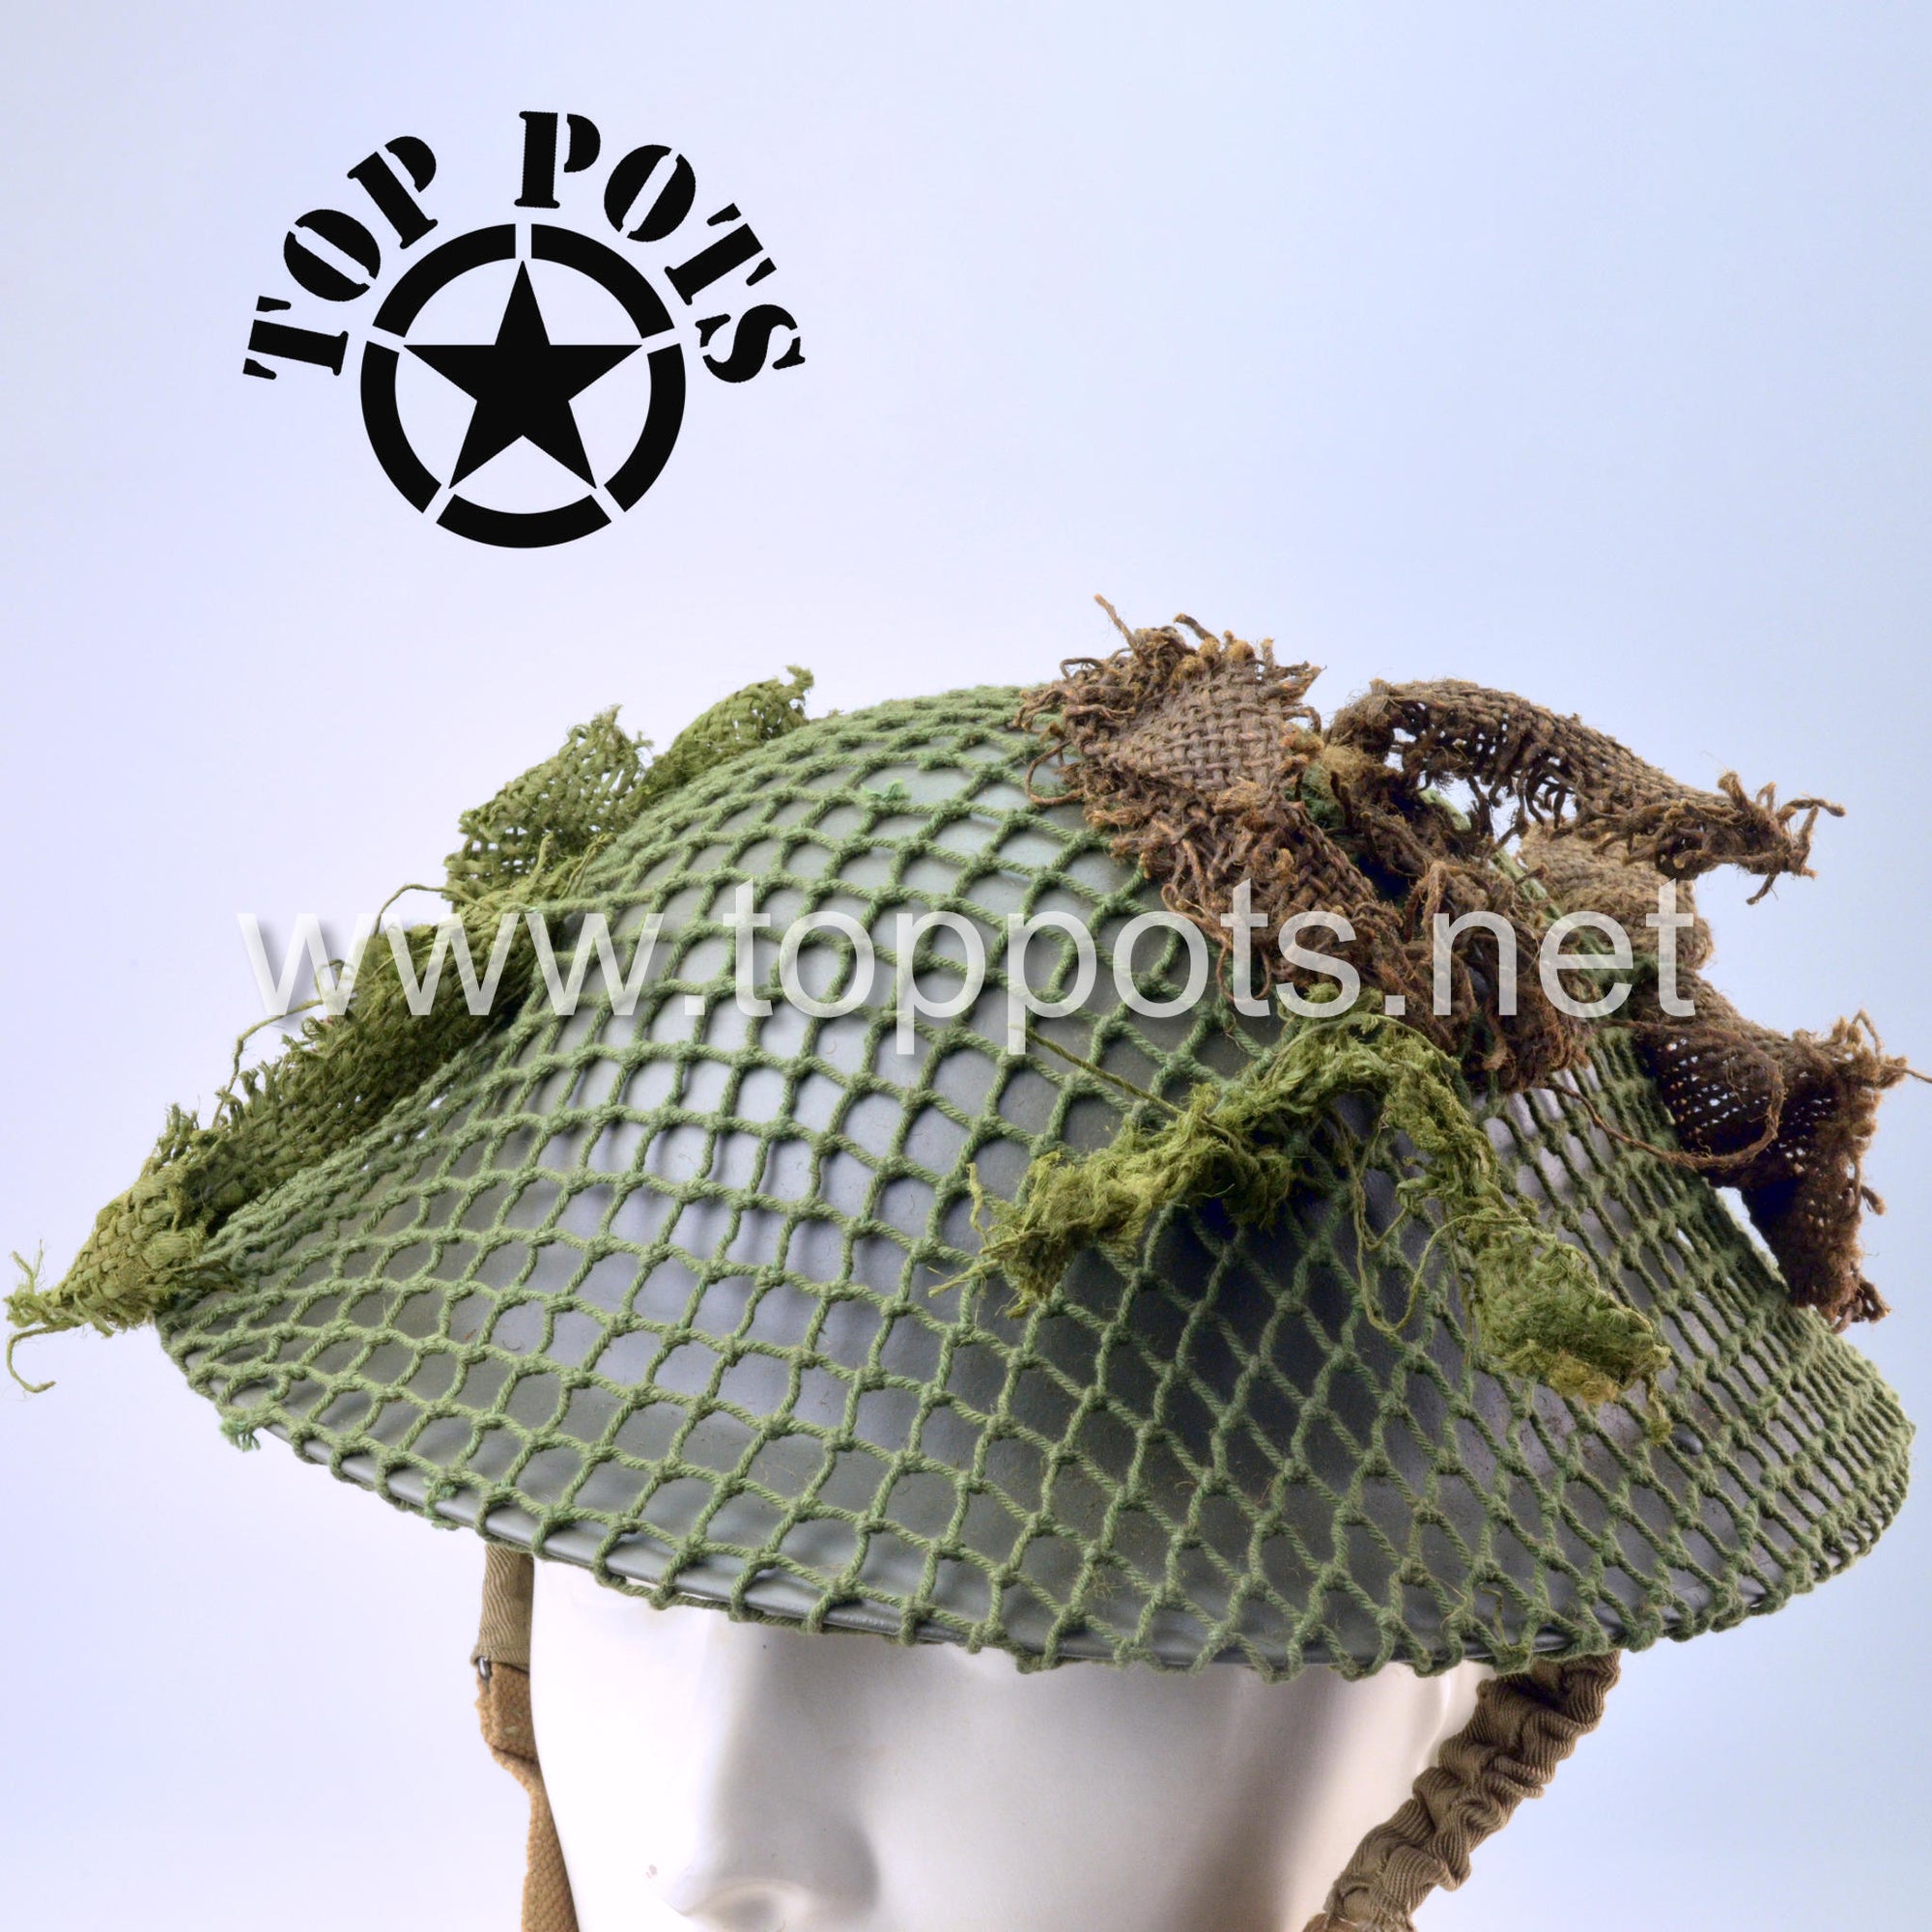 WWII British Army Reproduction MKII MK2 Enlisted Brodie Helmet with Original Helmet Net – Smooth Finish